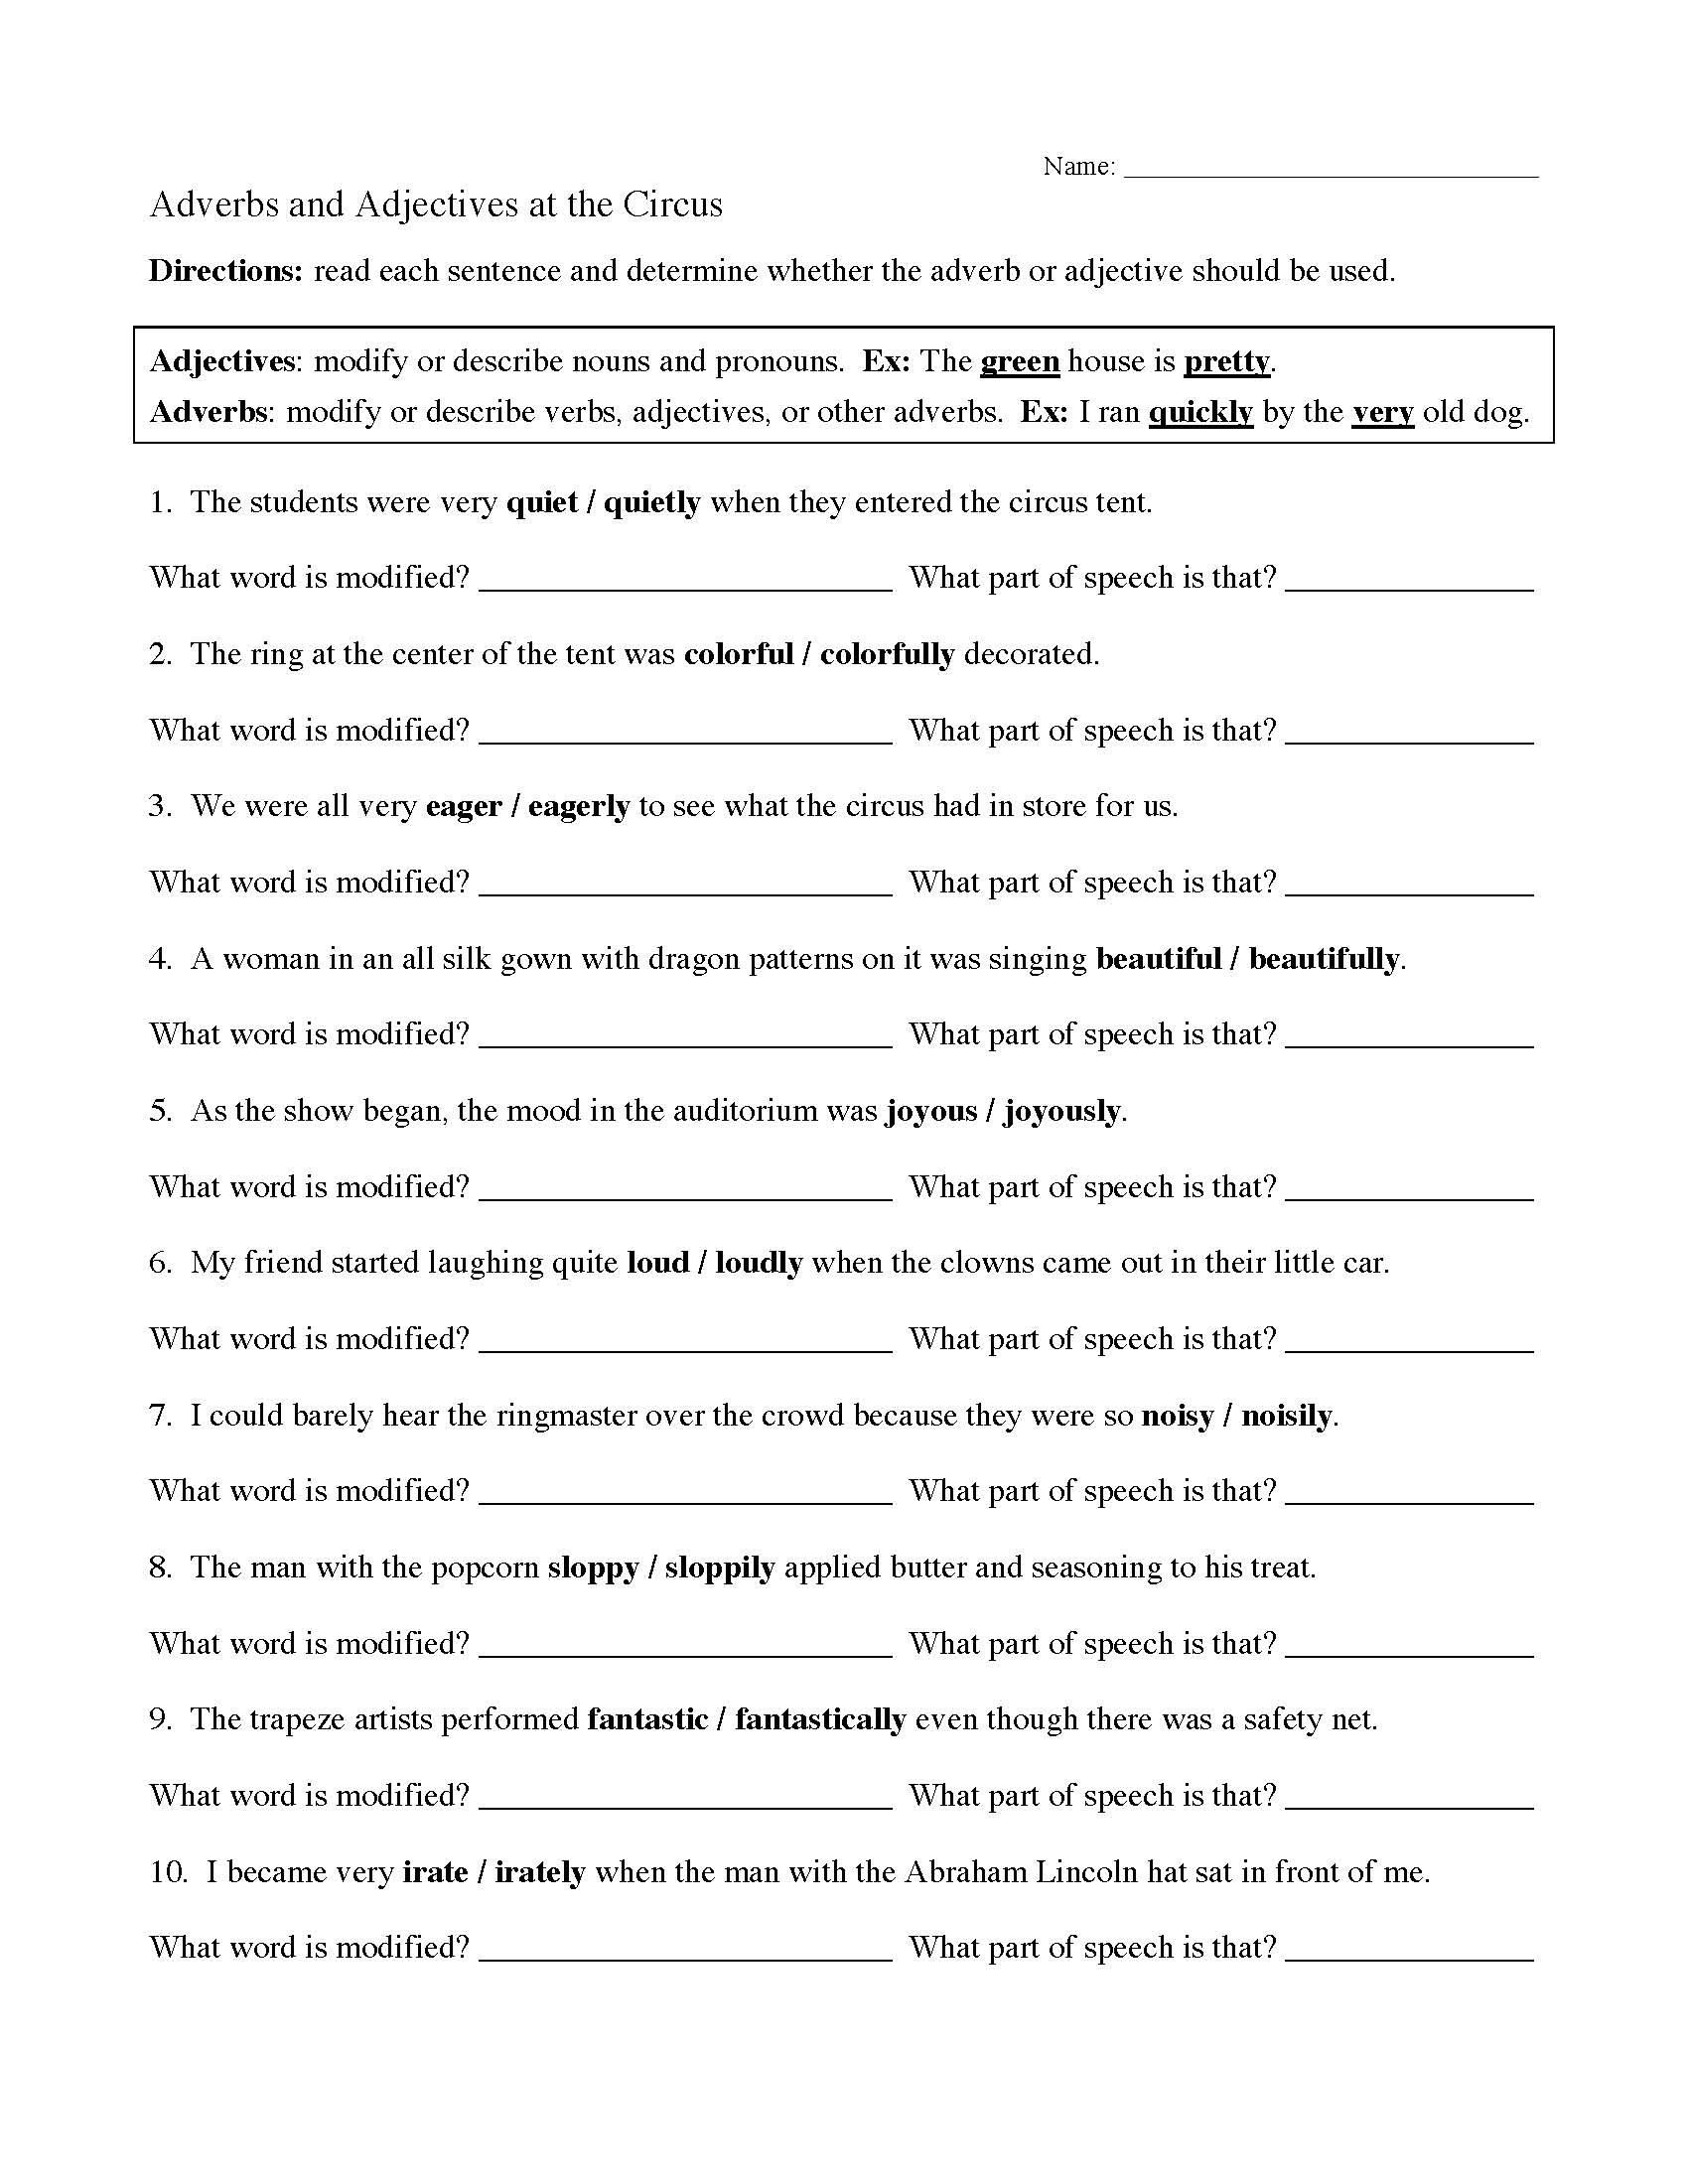 Adverbs And Adjectives Worksheet 2 Preview